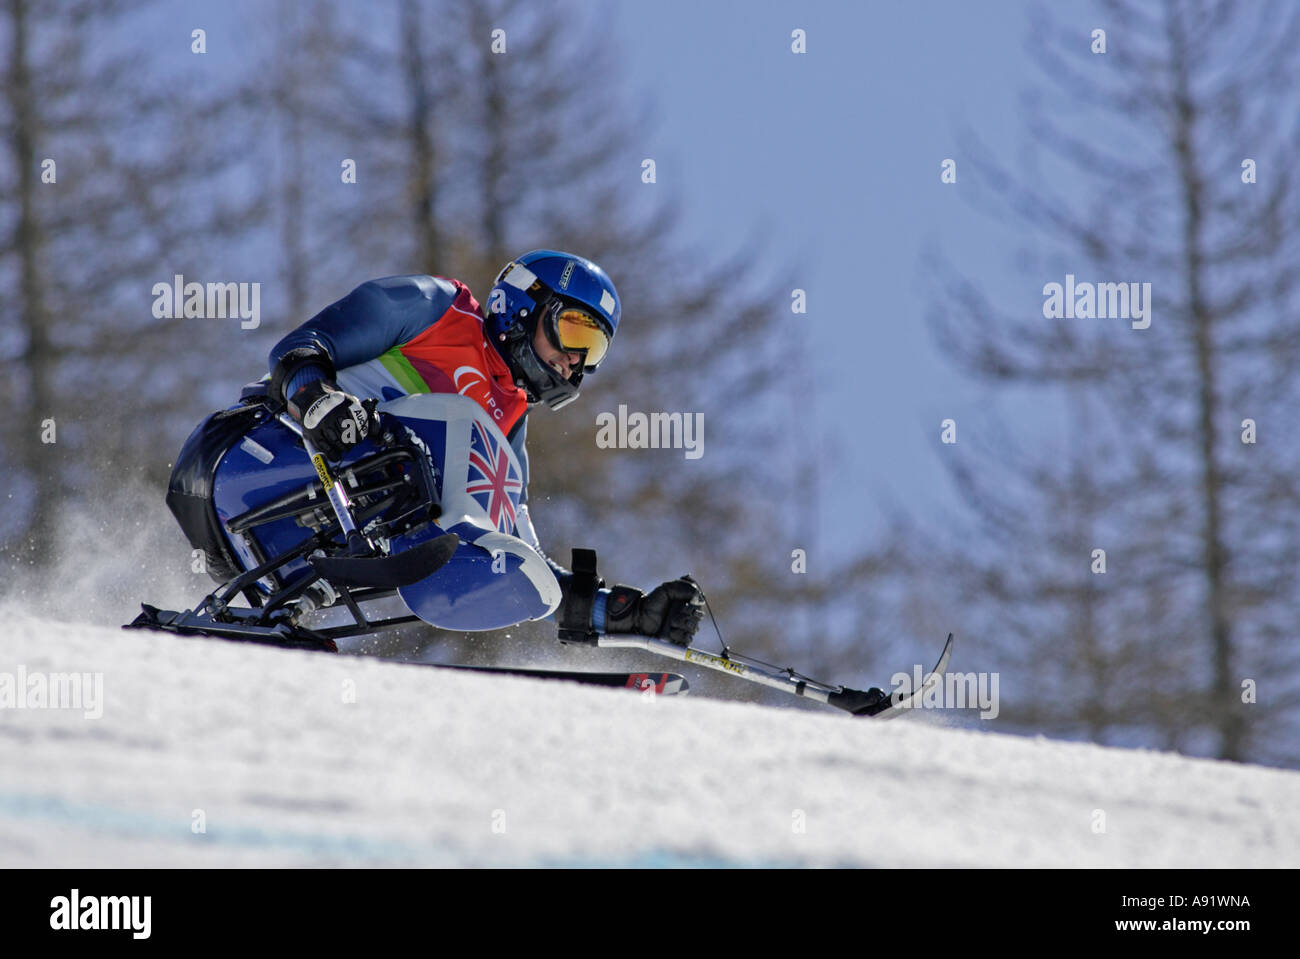 Sean Rose LW11 of Great Britain in the Mens Alpine Skiing Super G Sitting competition Stock Photo